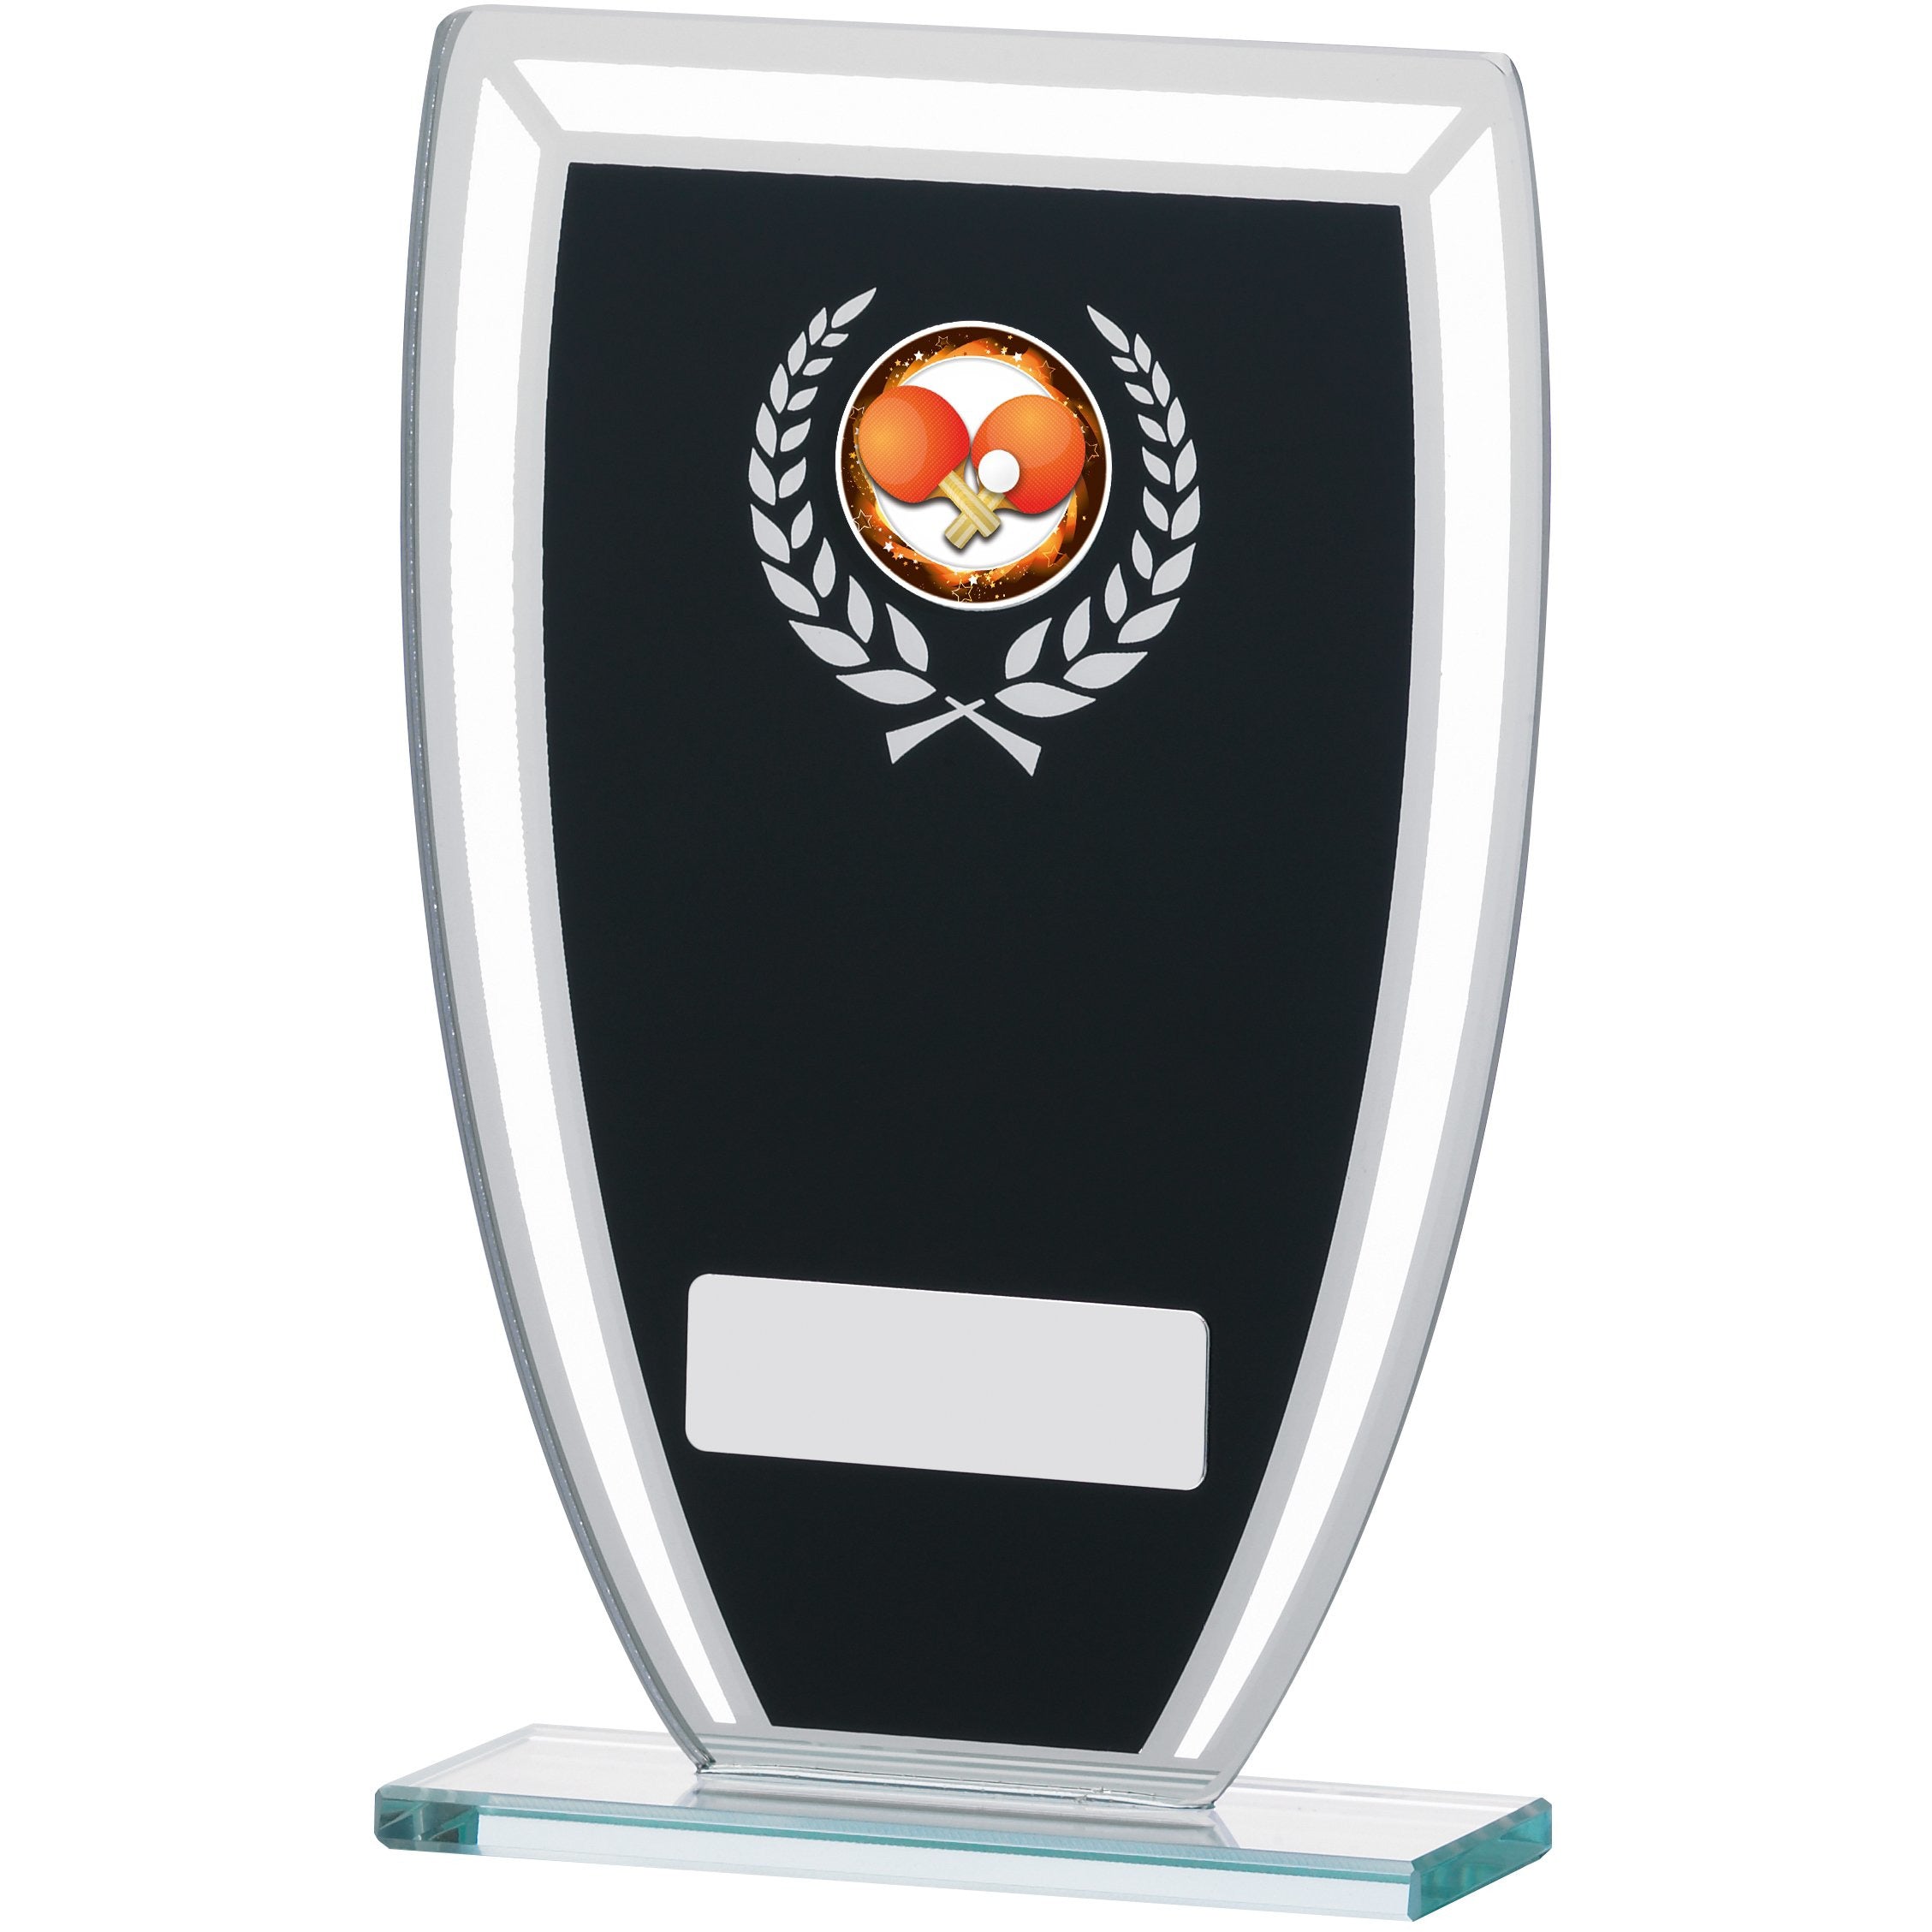 Black Mirror Curved Glass Trophy